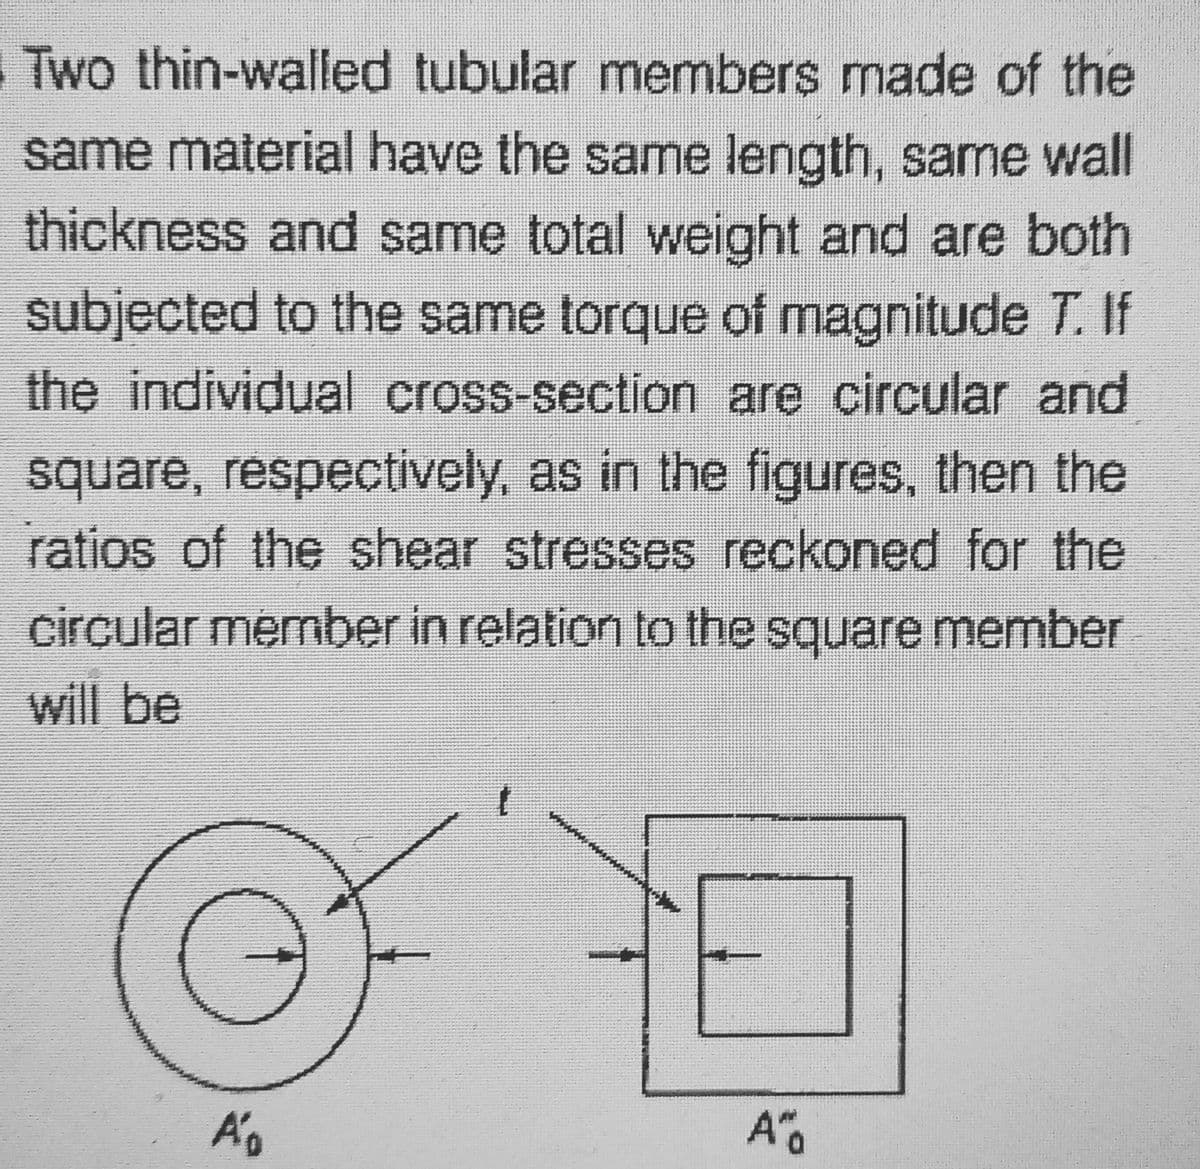 Two thin-walled tubular members made of the
same material have the same length, same wall
thickness and same total weight and are both
subjected to the same torque of magnitude T. If
the individual cross-section are circular and
square, respectively, as in the figures, then the
ratios of the shear stresses reckoned for the
circular member in relation to the square member
will be
A
t
A